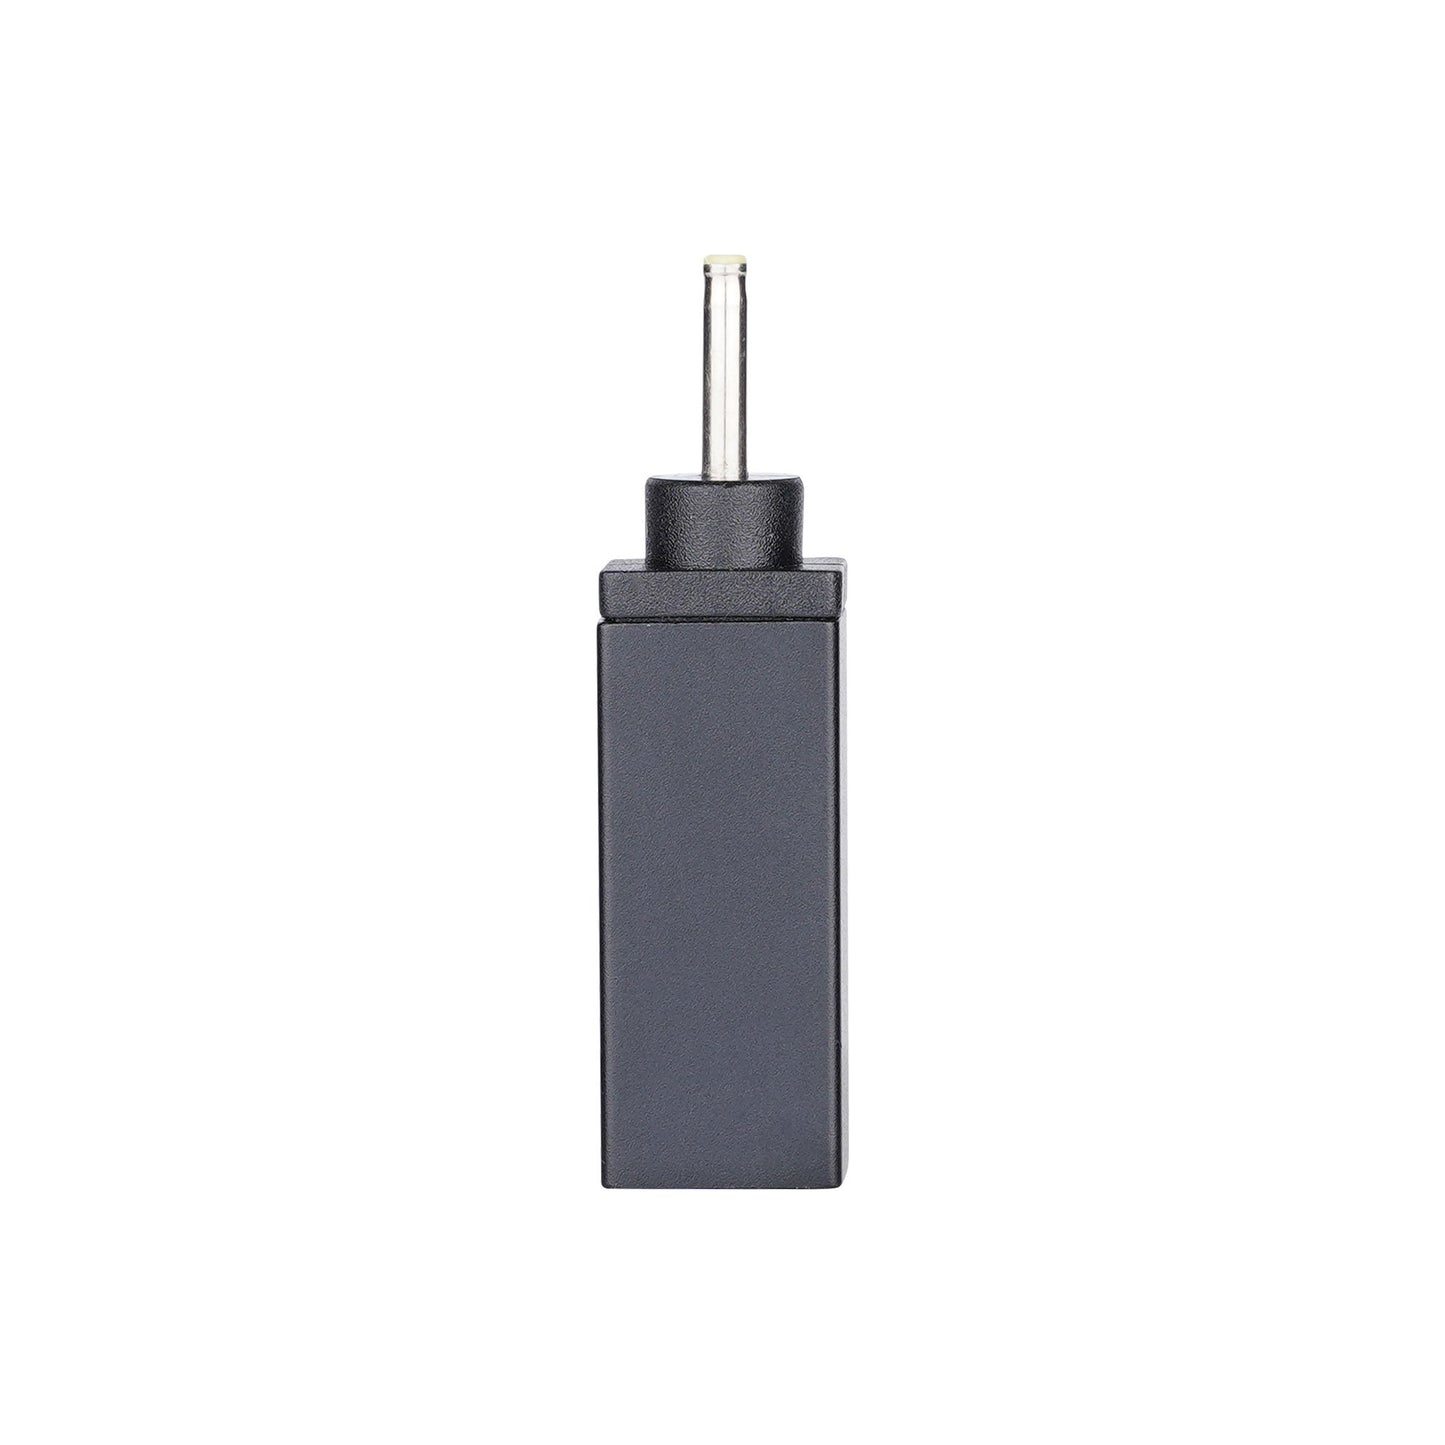 USB-C to DC Adapter ASUS Tip K 2.5x0.7mm